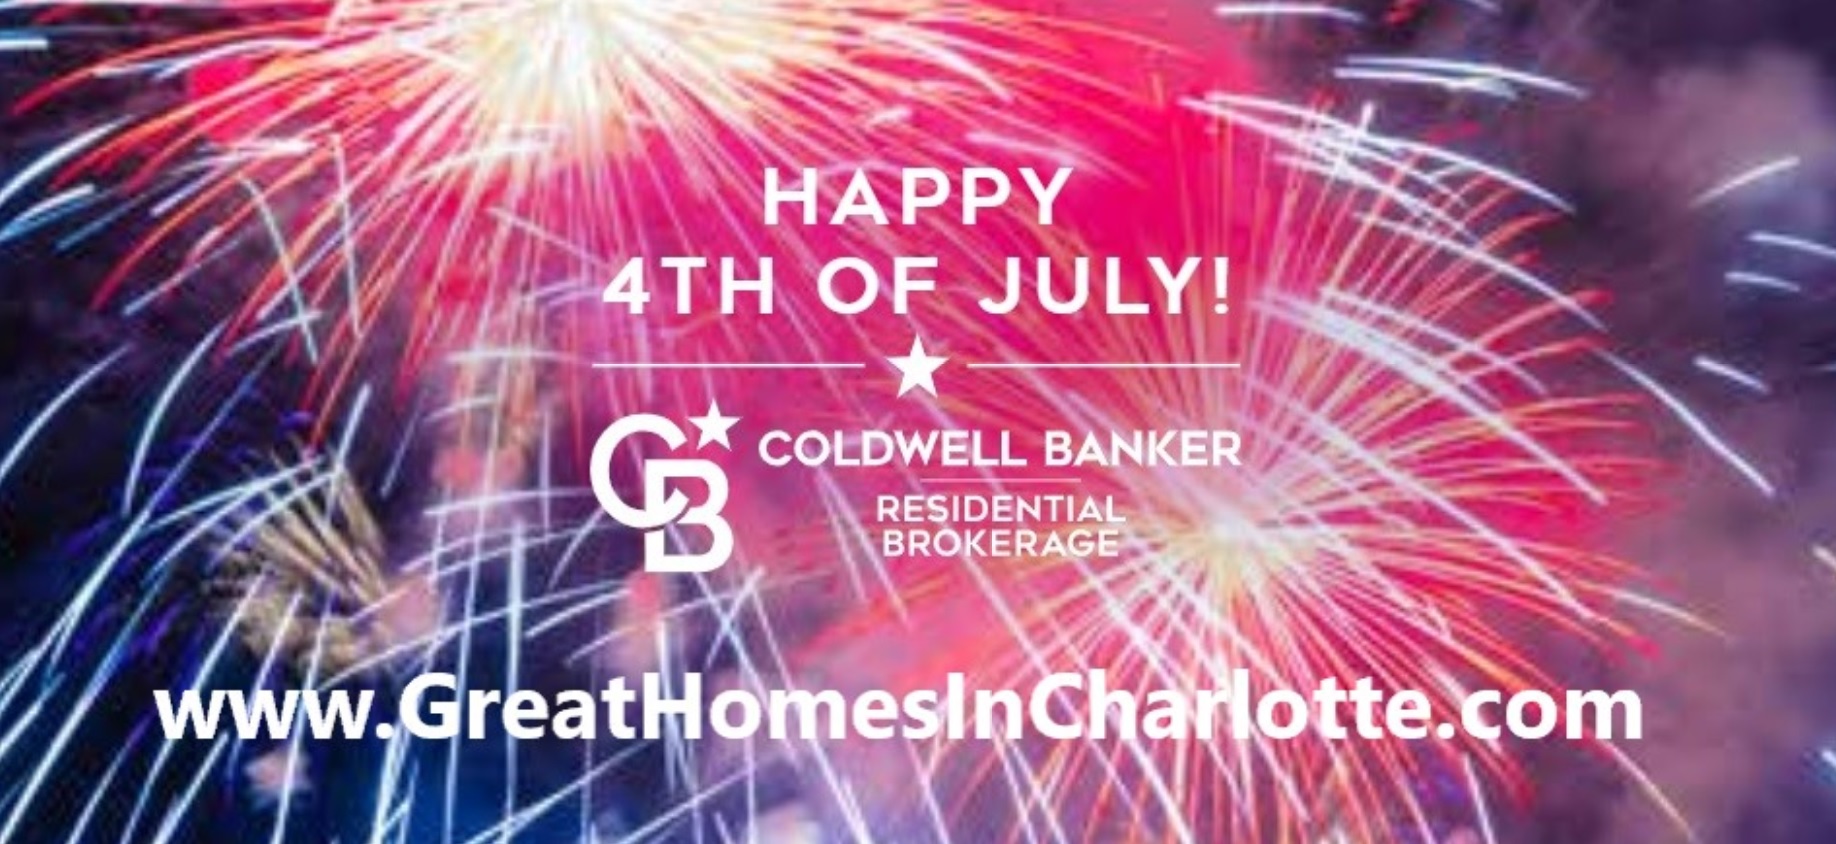 Happy July 4th from Great Homes In Charlotte